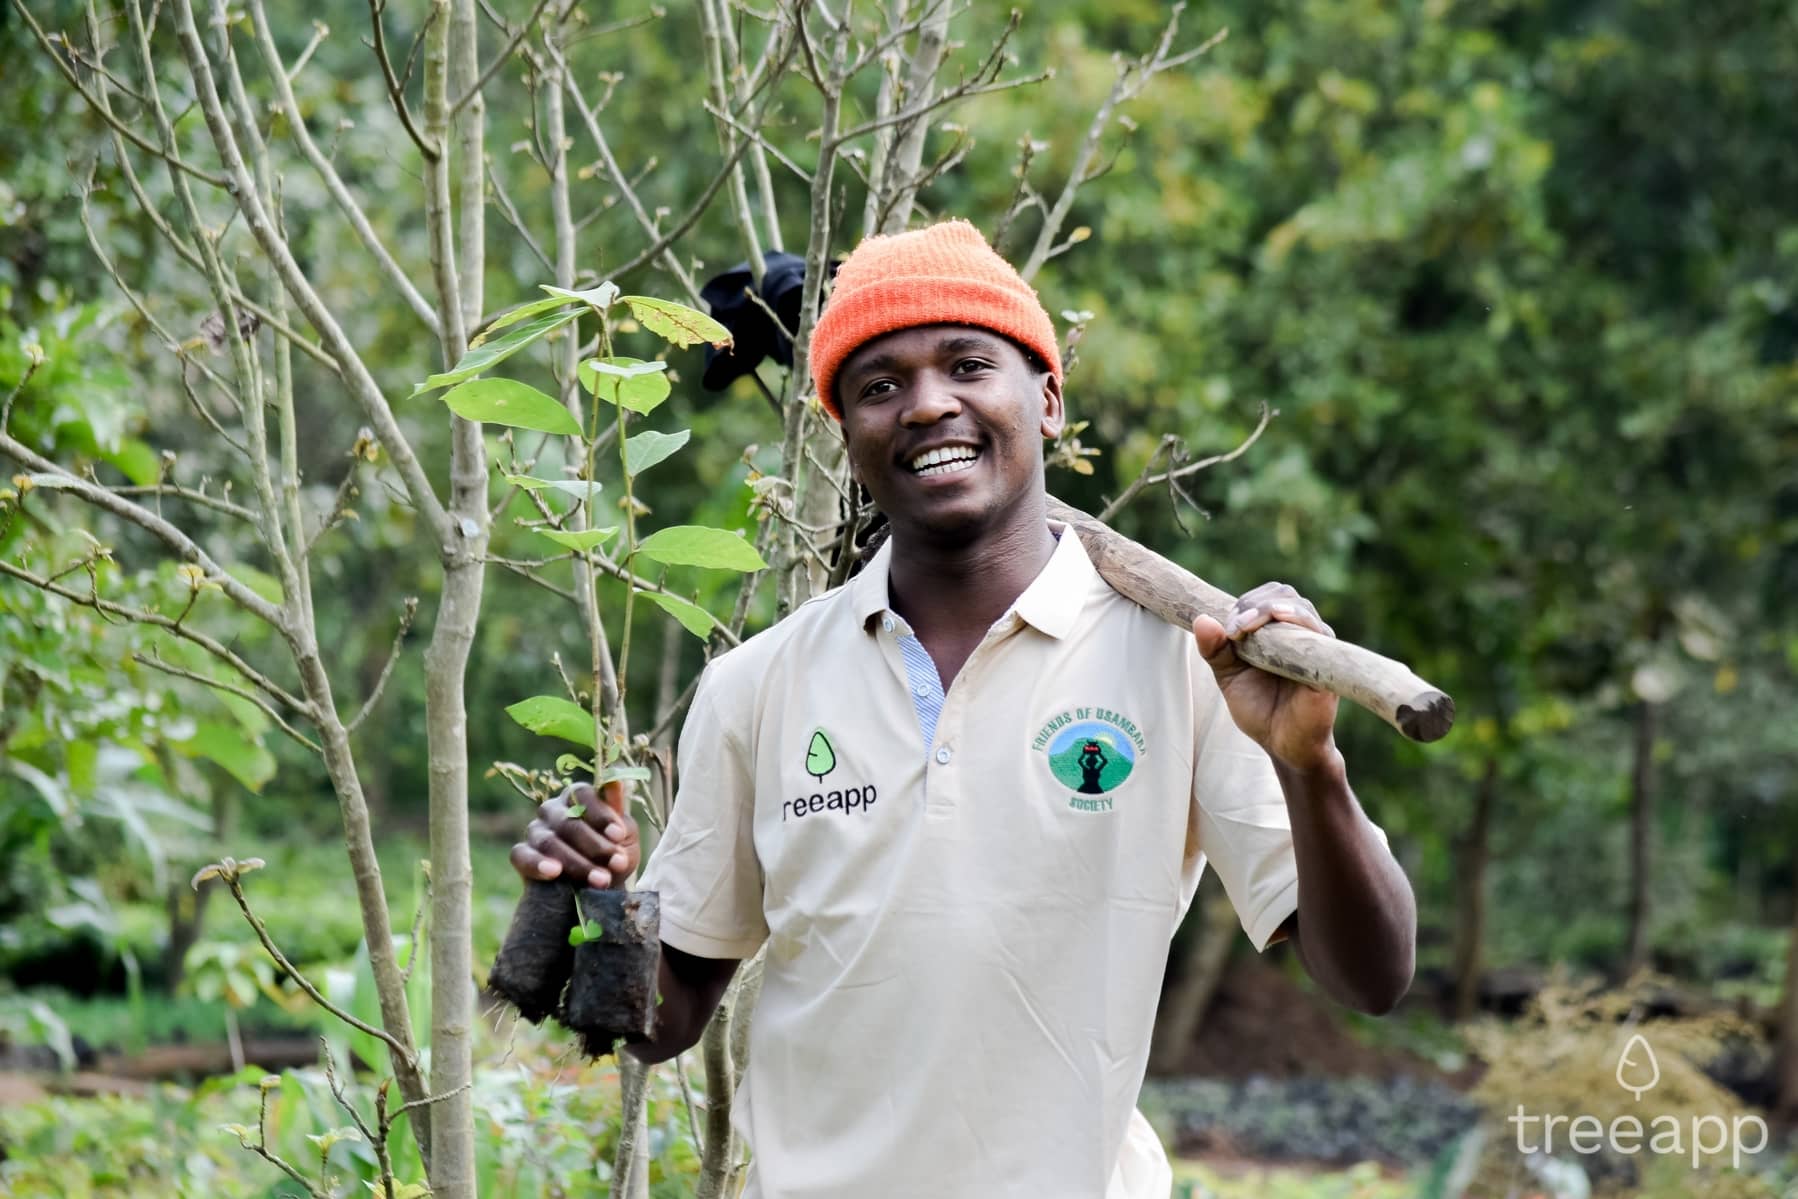 Photo: Treeapp planter with saplings in Lushoto in Tanzania in August 2021